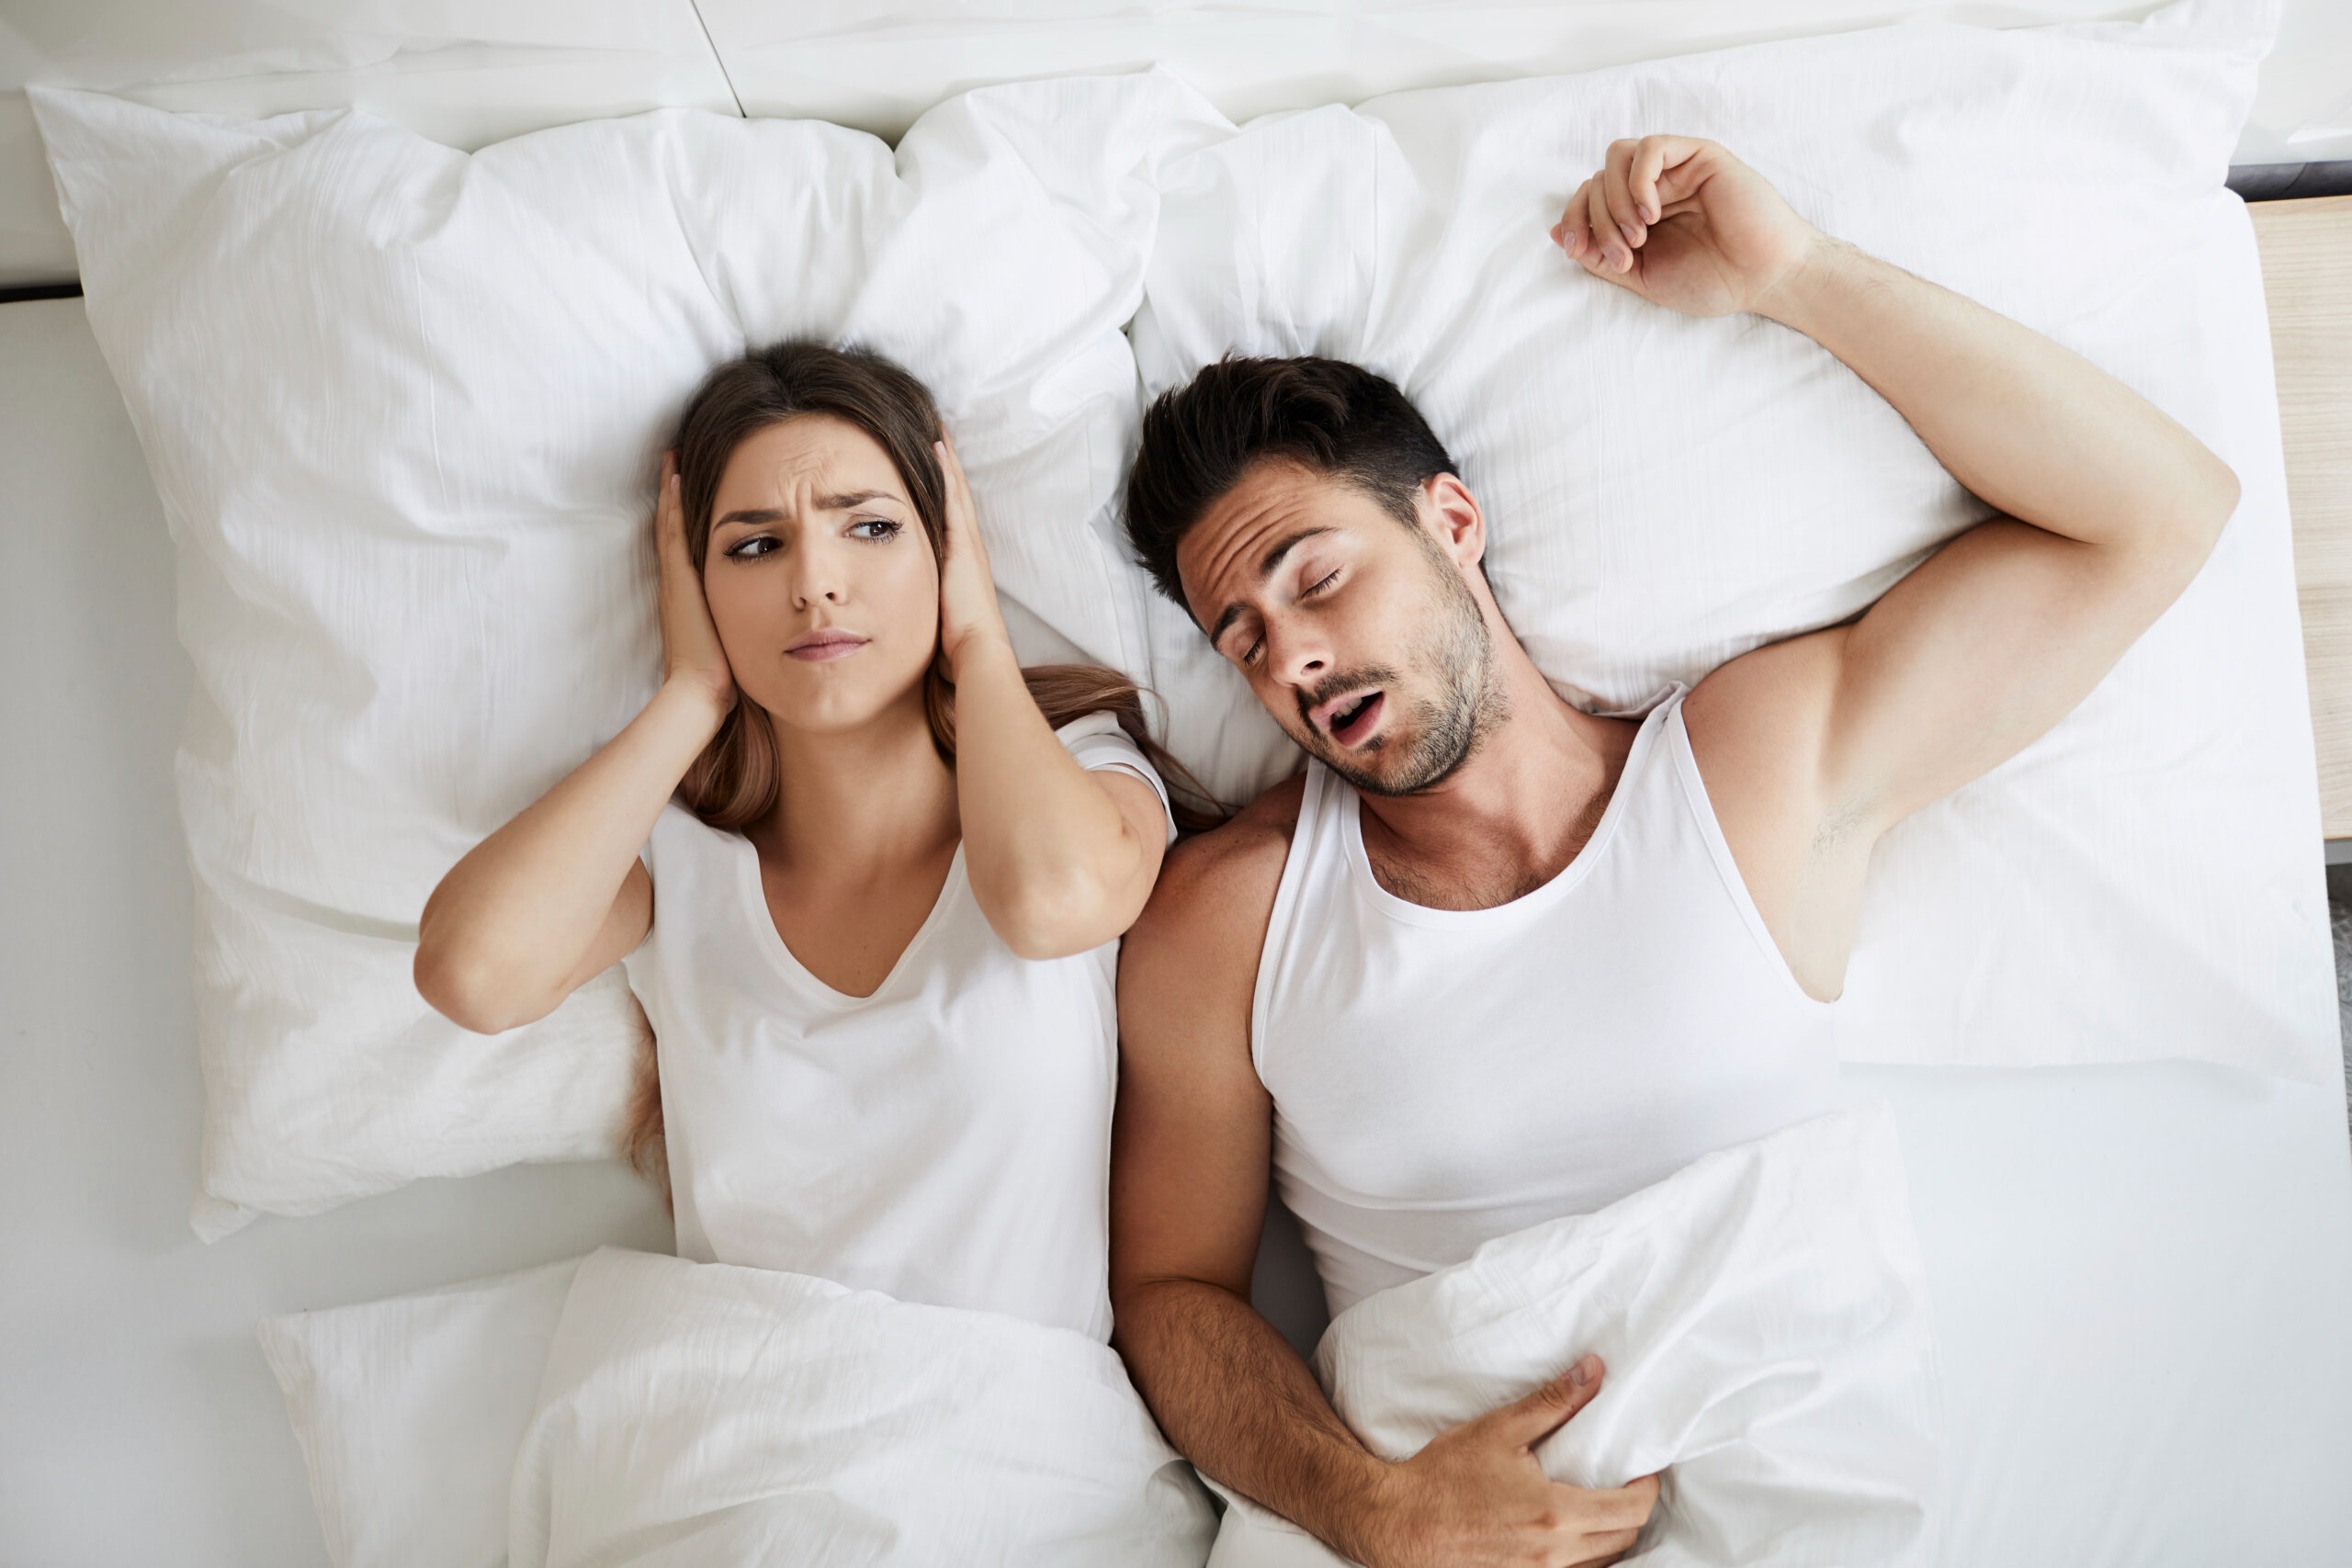 Does My Partner Have Sleep Apnea? Signs, Dangers, and How to Approach It